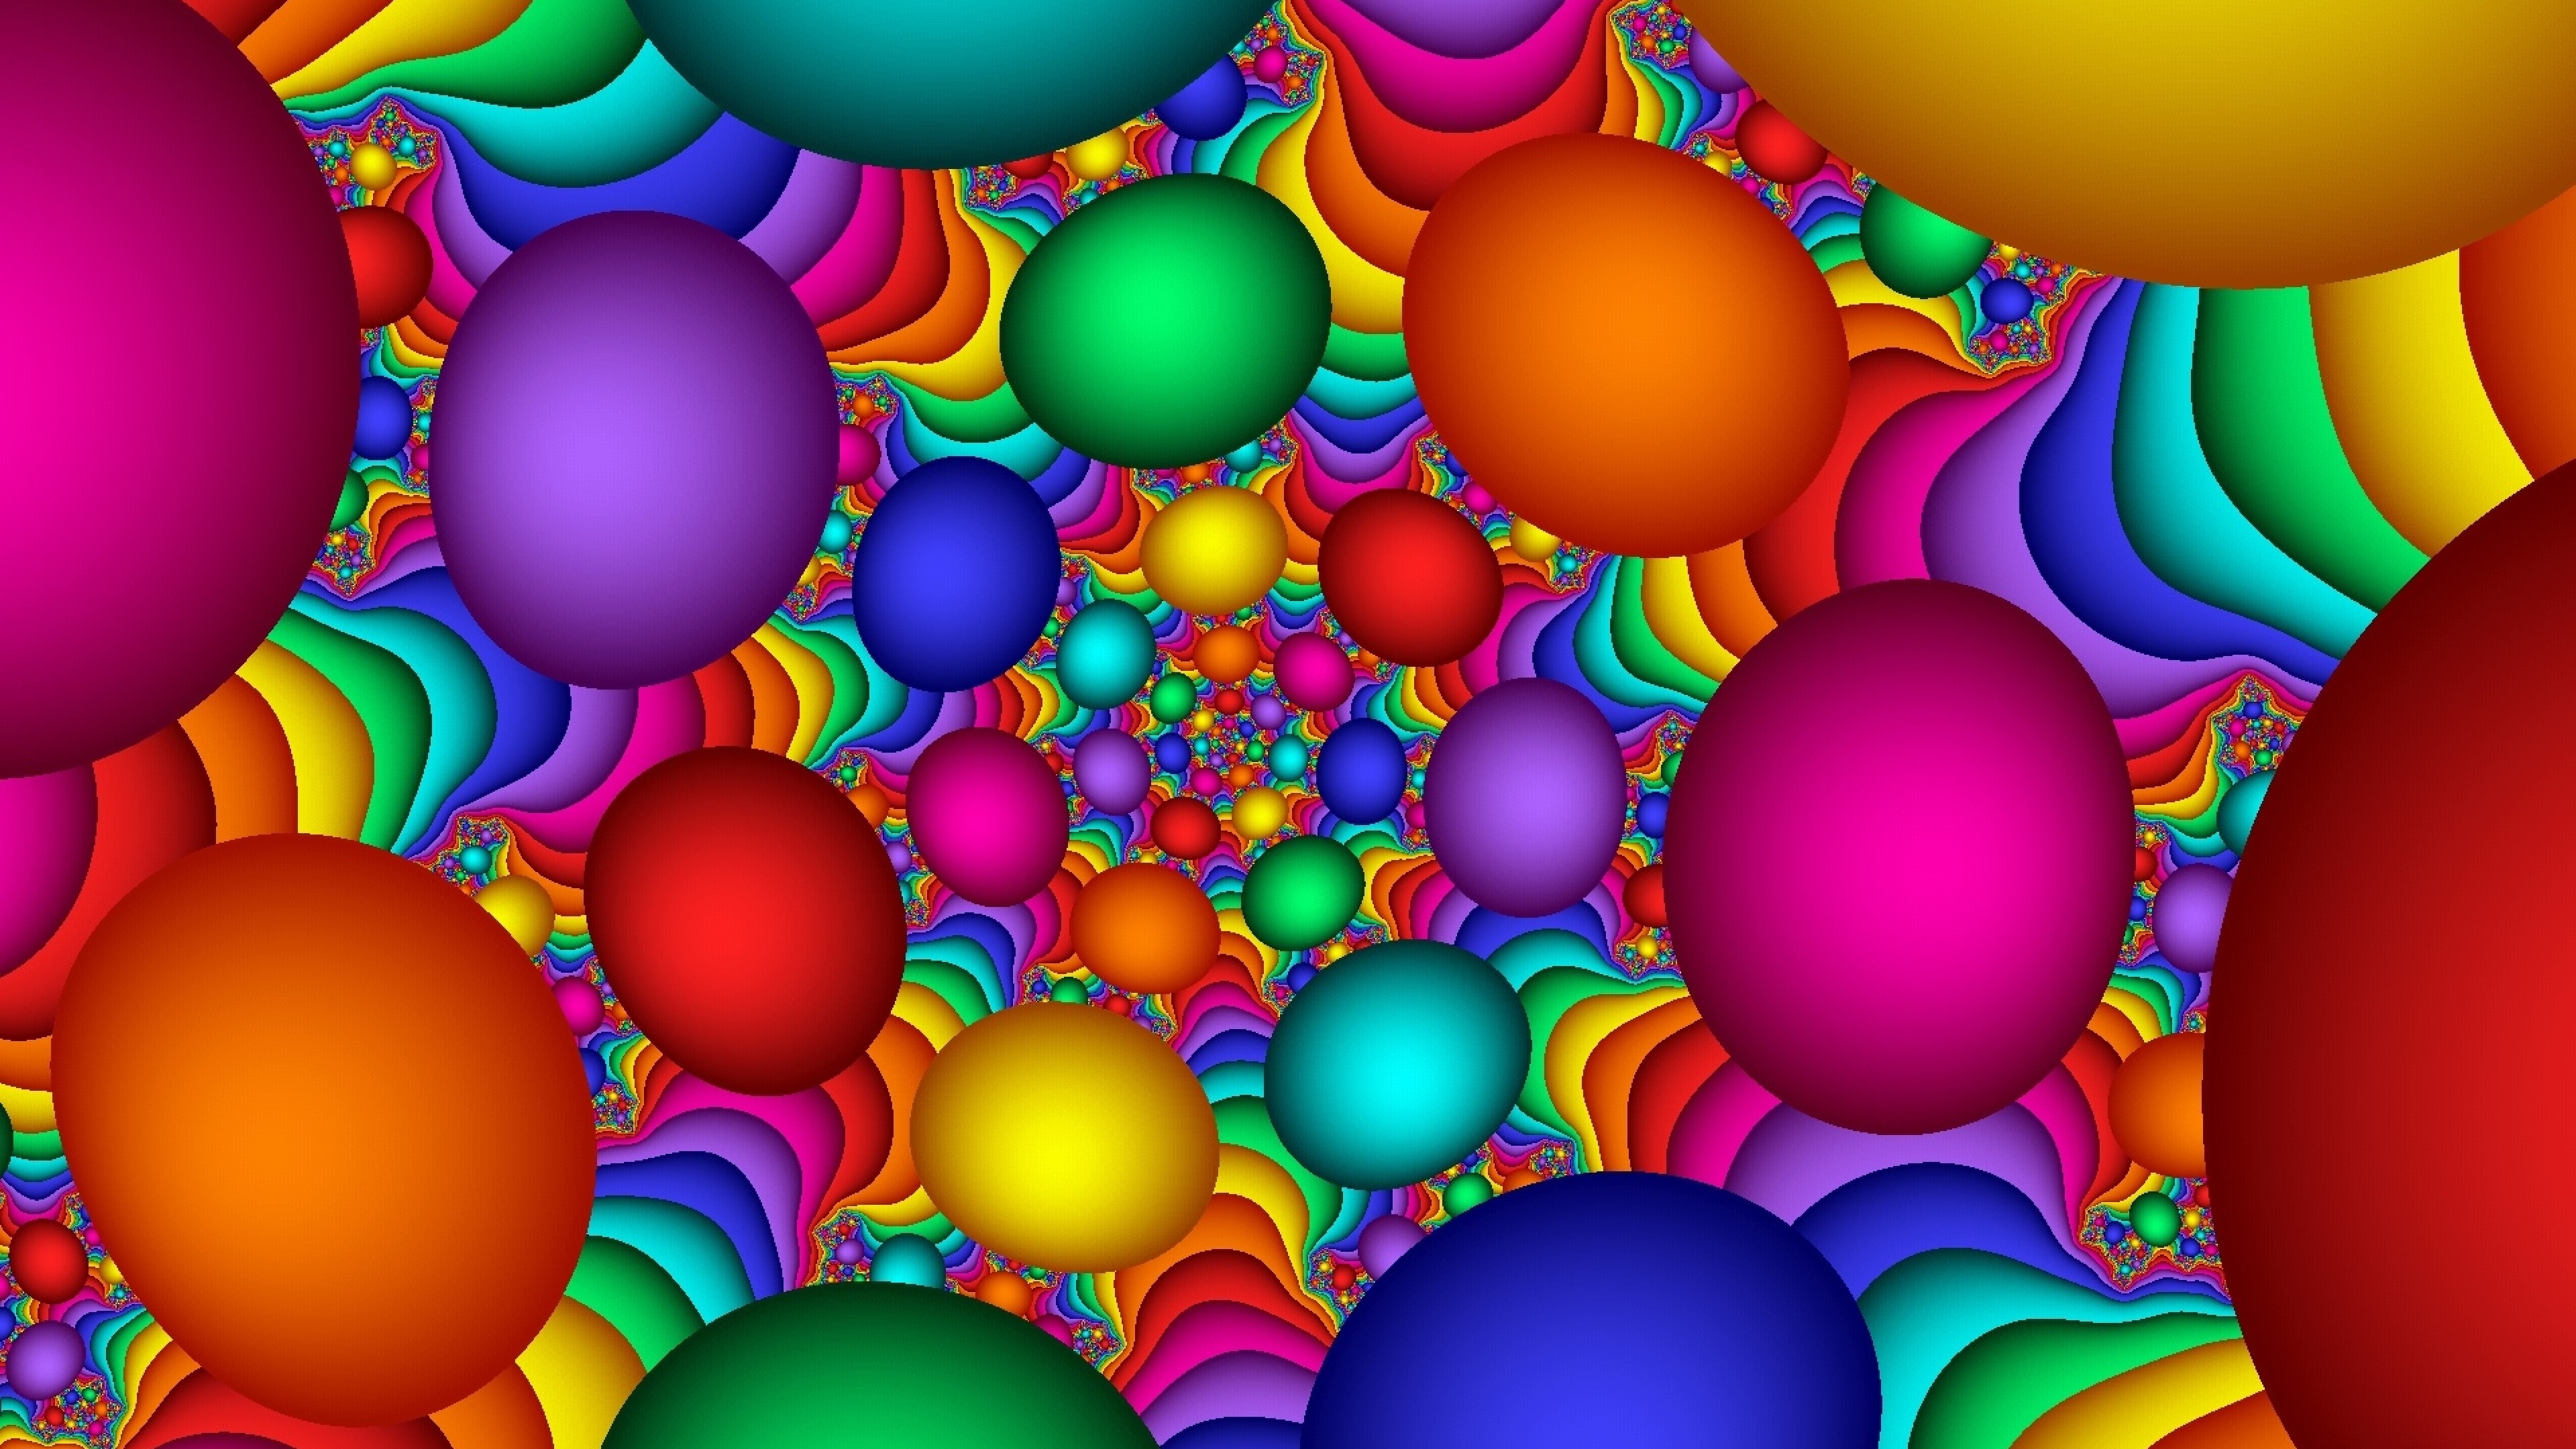 3840x2160  Wallpaper balloons, colorful, background, bright